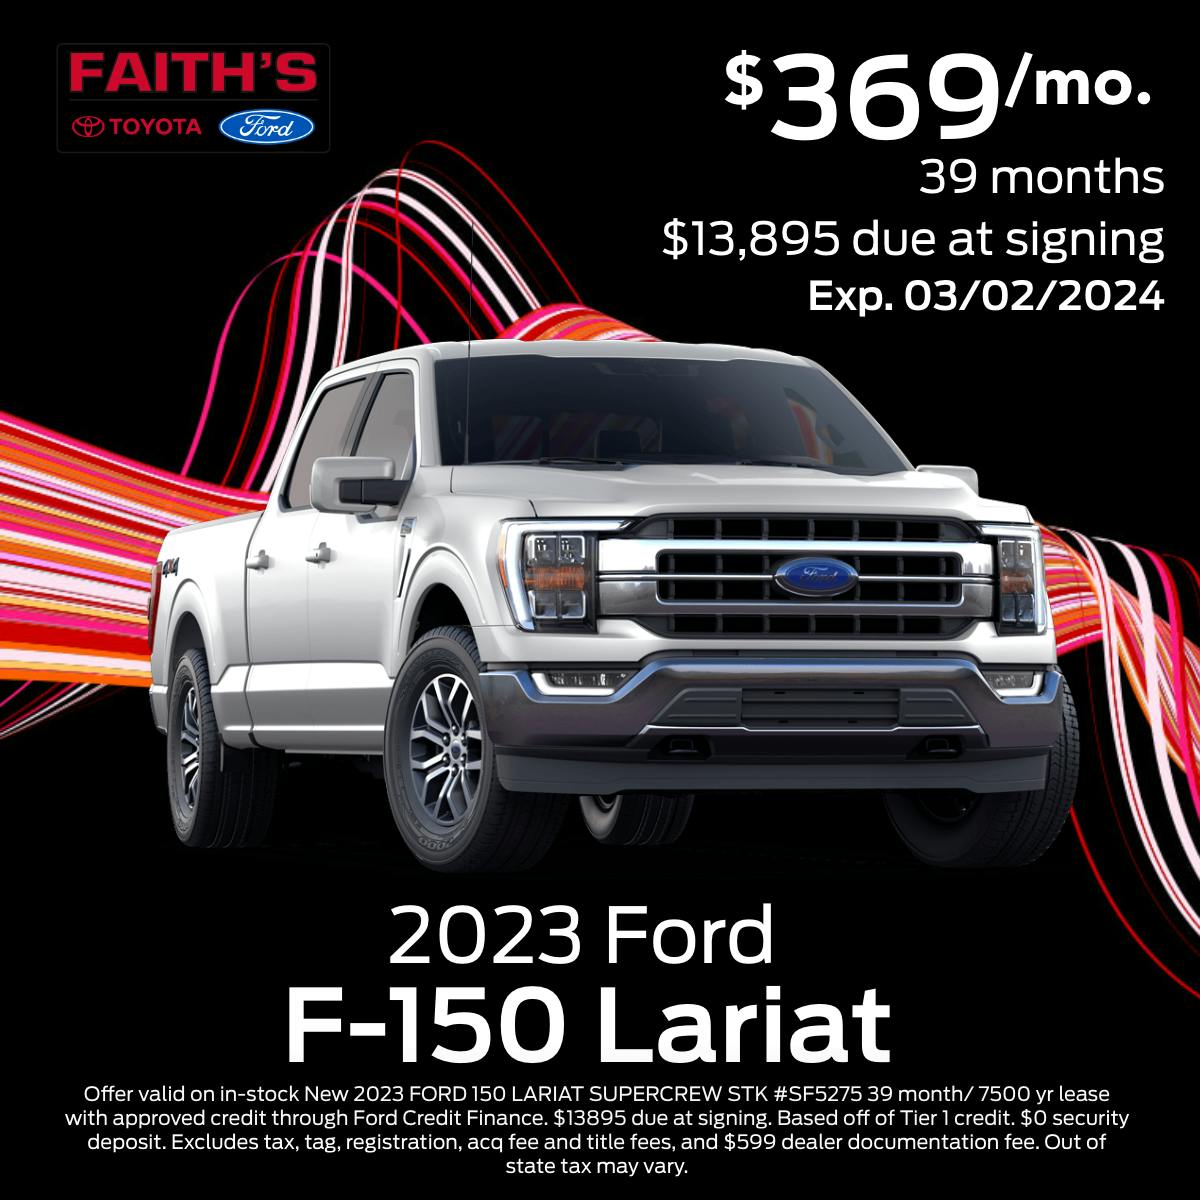 2023 Ford F-150 Lariat Lease Offer | Faiths Ford